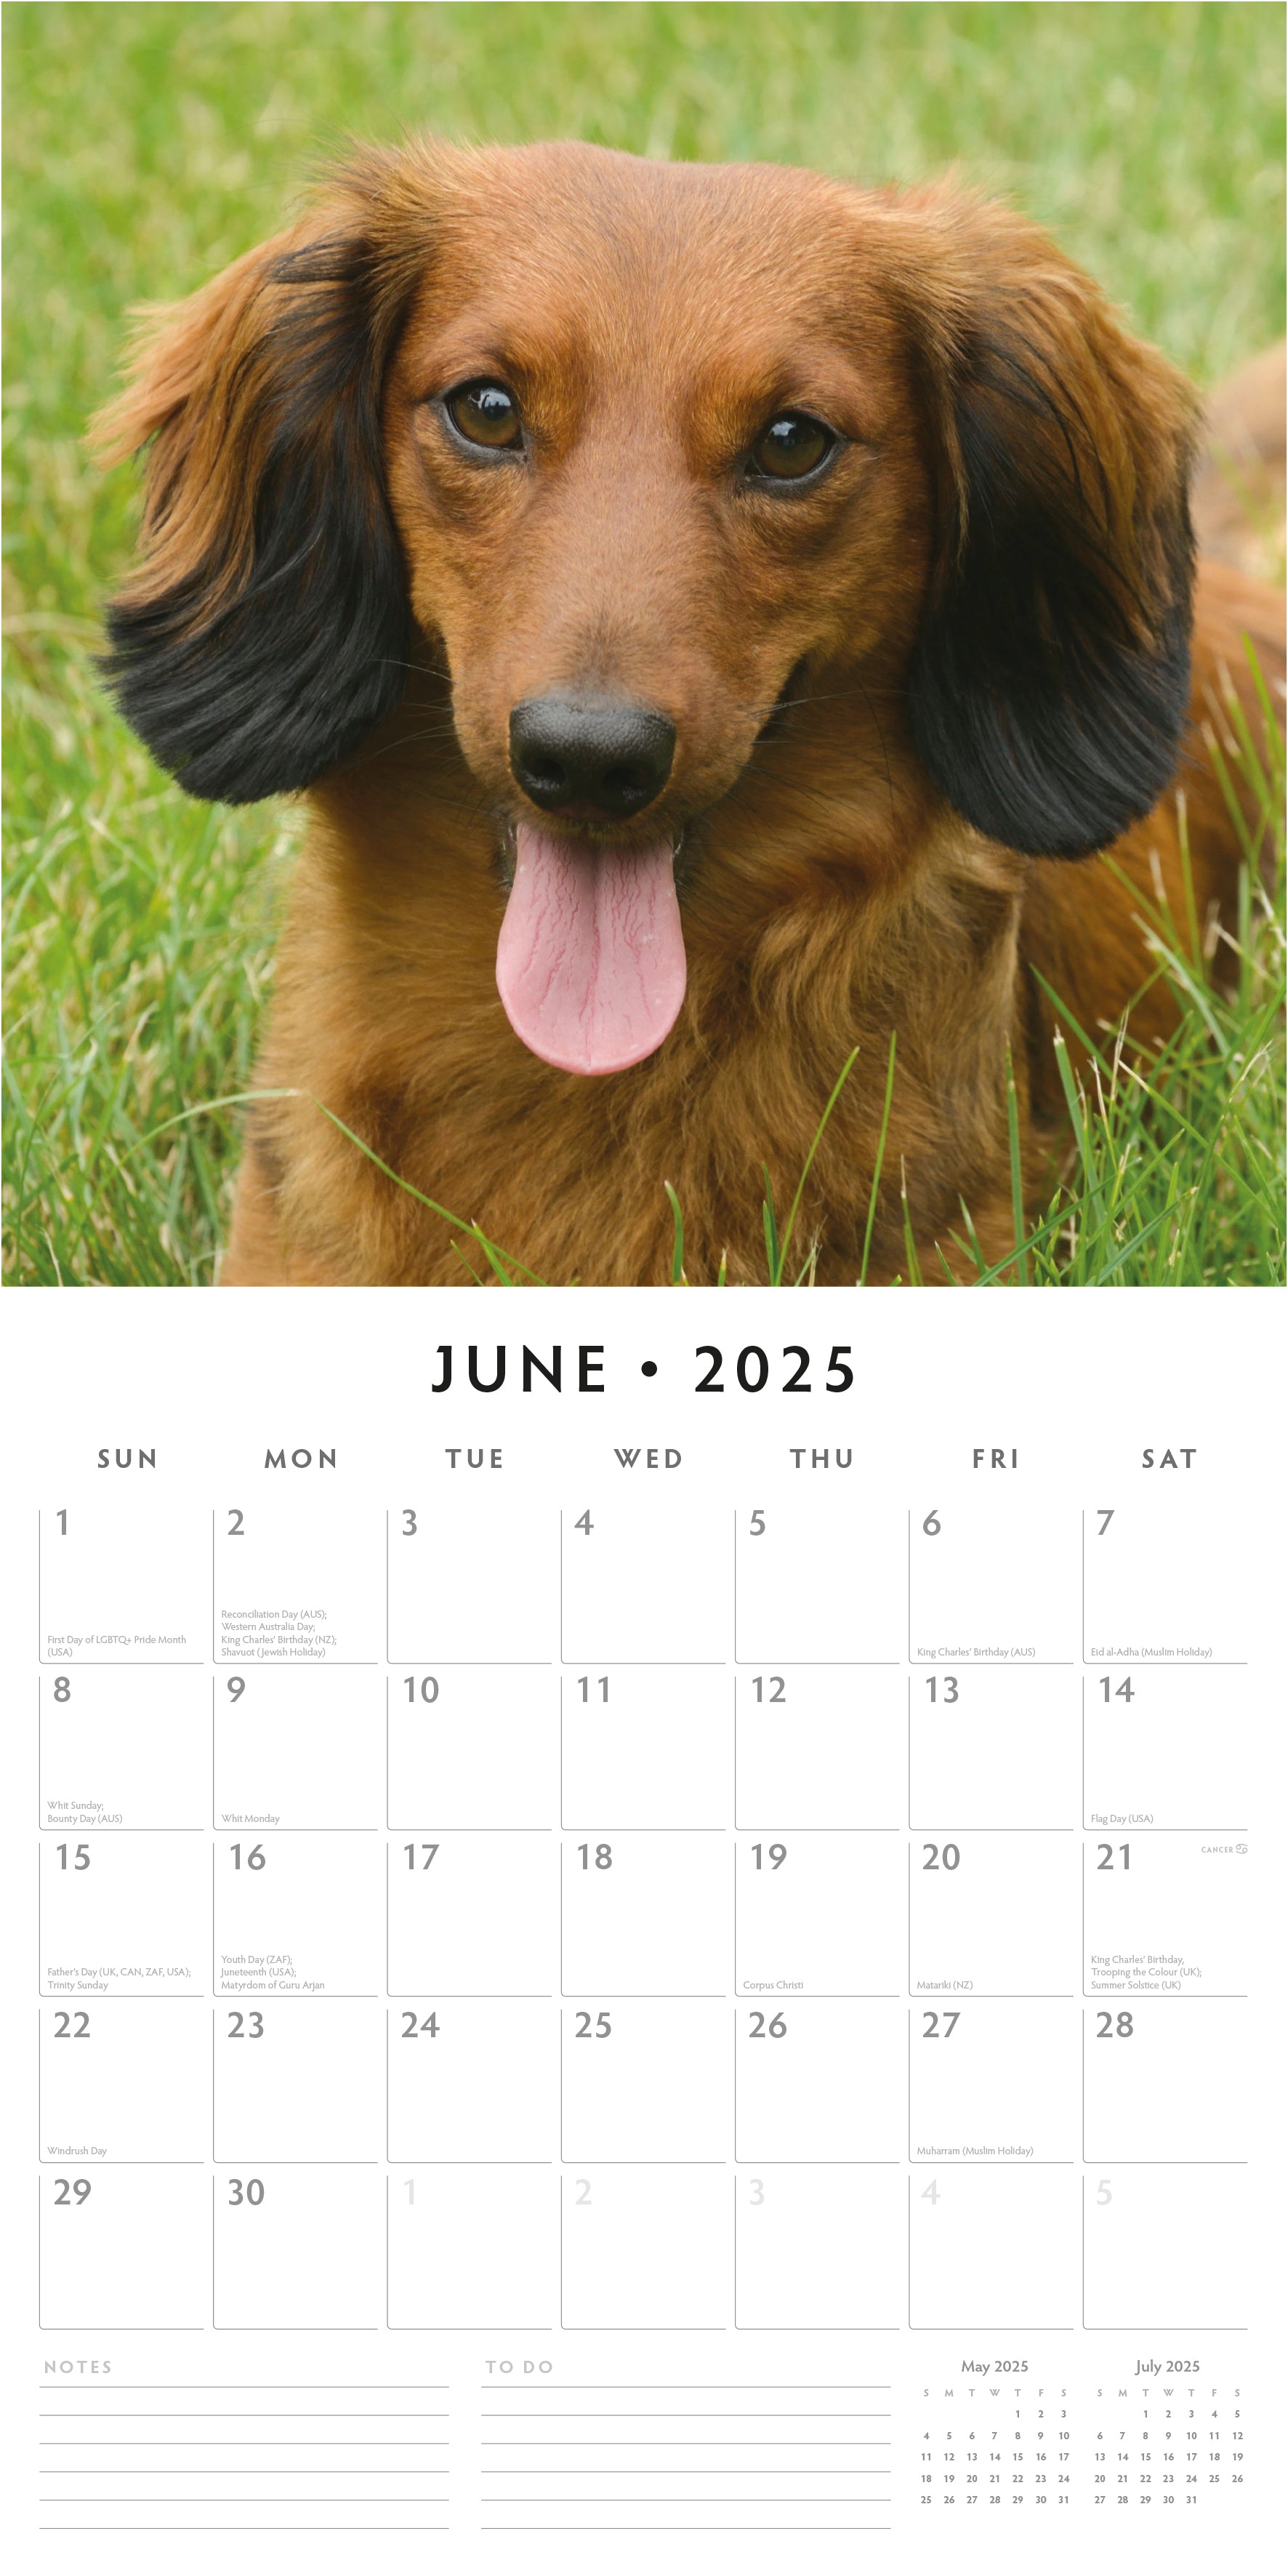 2025 Long-Haired Dachshunds - Square Wall Calendar